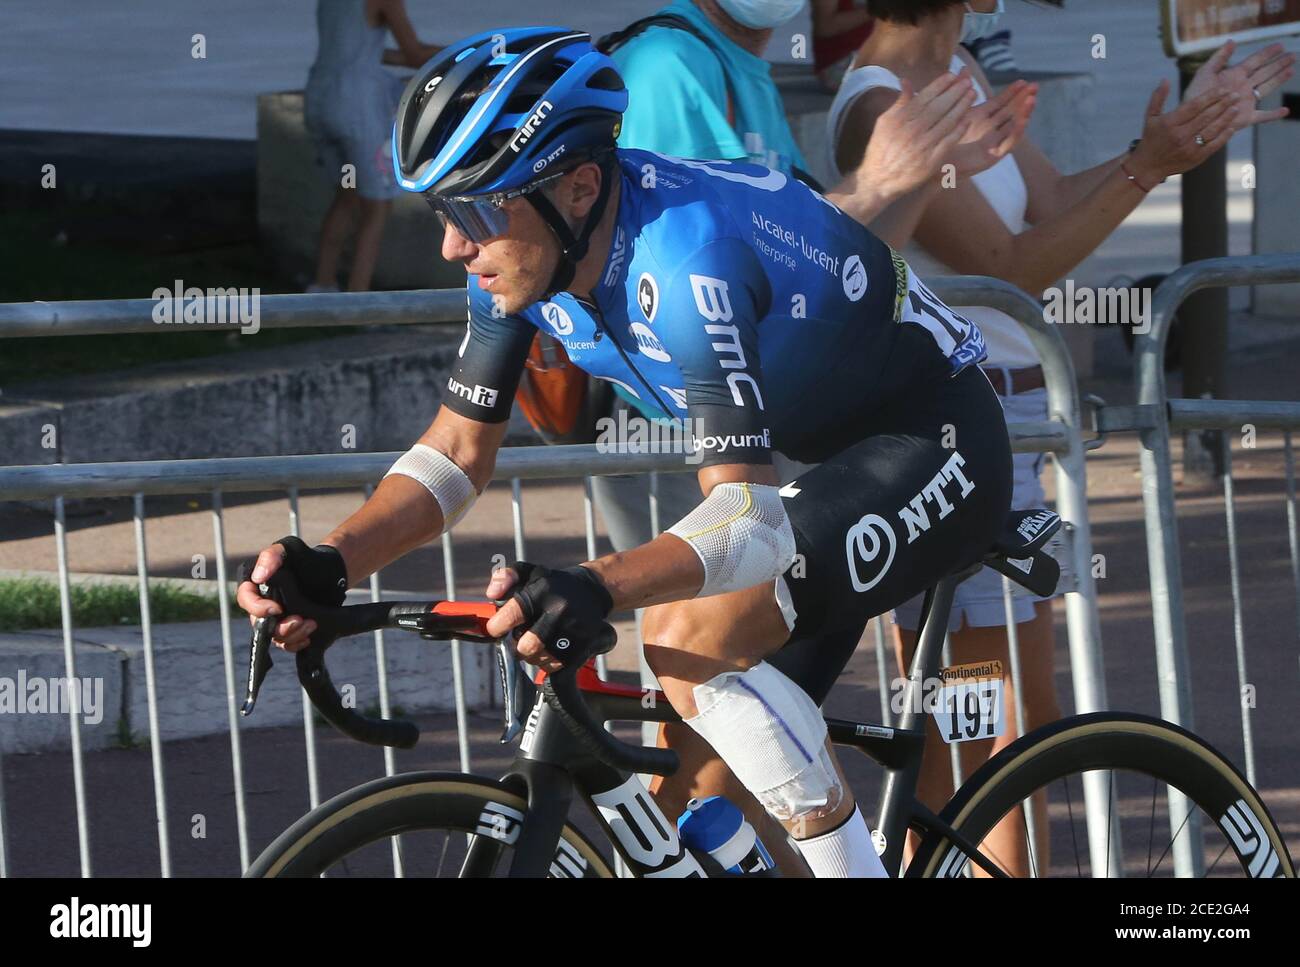 Domenico Pozzovivo of NTT Pro Cycling during the Tour de, France. , . in  Nice, France - Photo Laurent Lairys/DPPI Credit: Laurent Lairys/Agence  Locevaphotos/Alamy Live News Stock Photo - Alamy